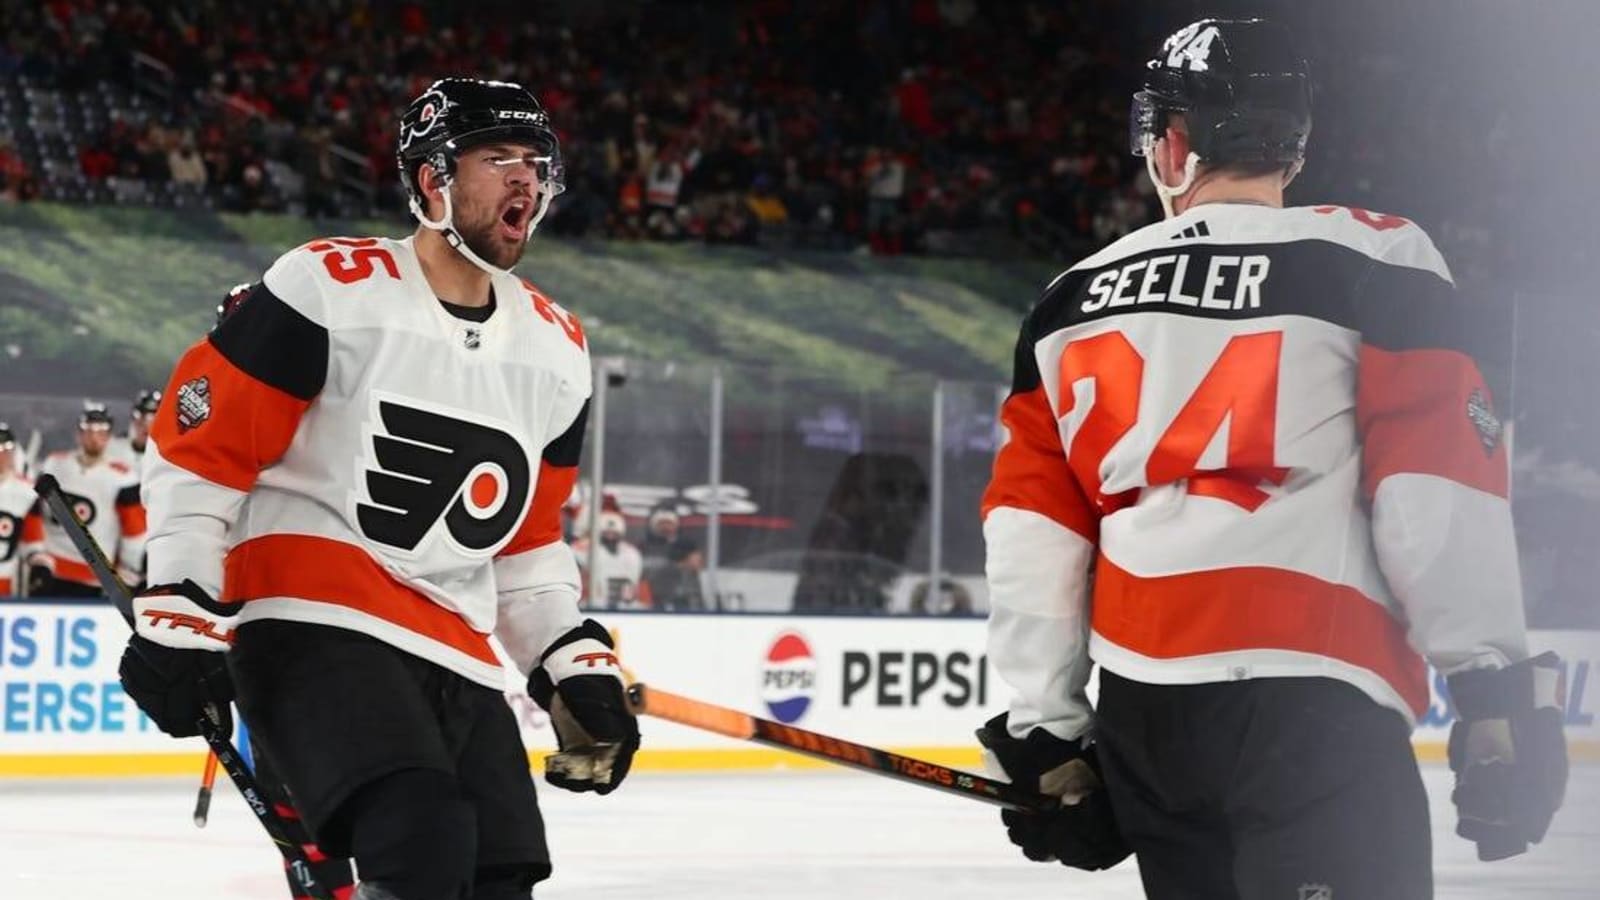 Flyers look to come out of cold, heat up vs. Blackhawks